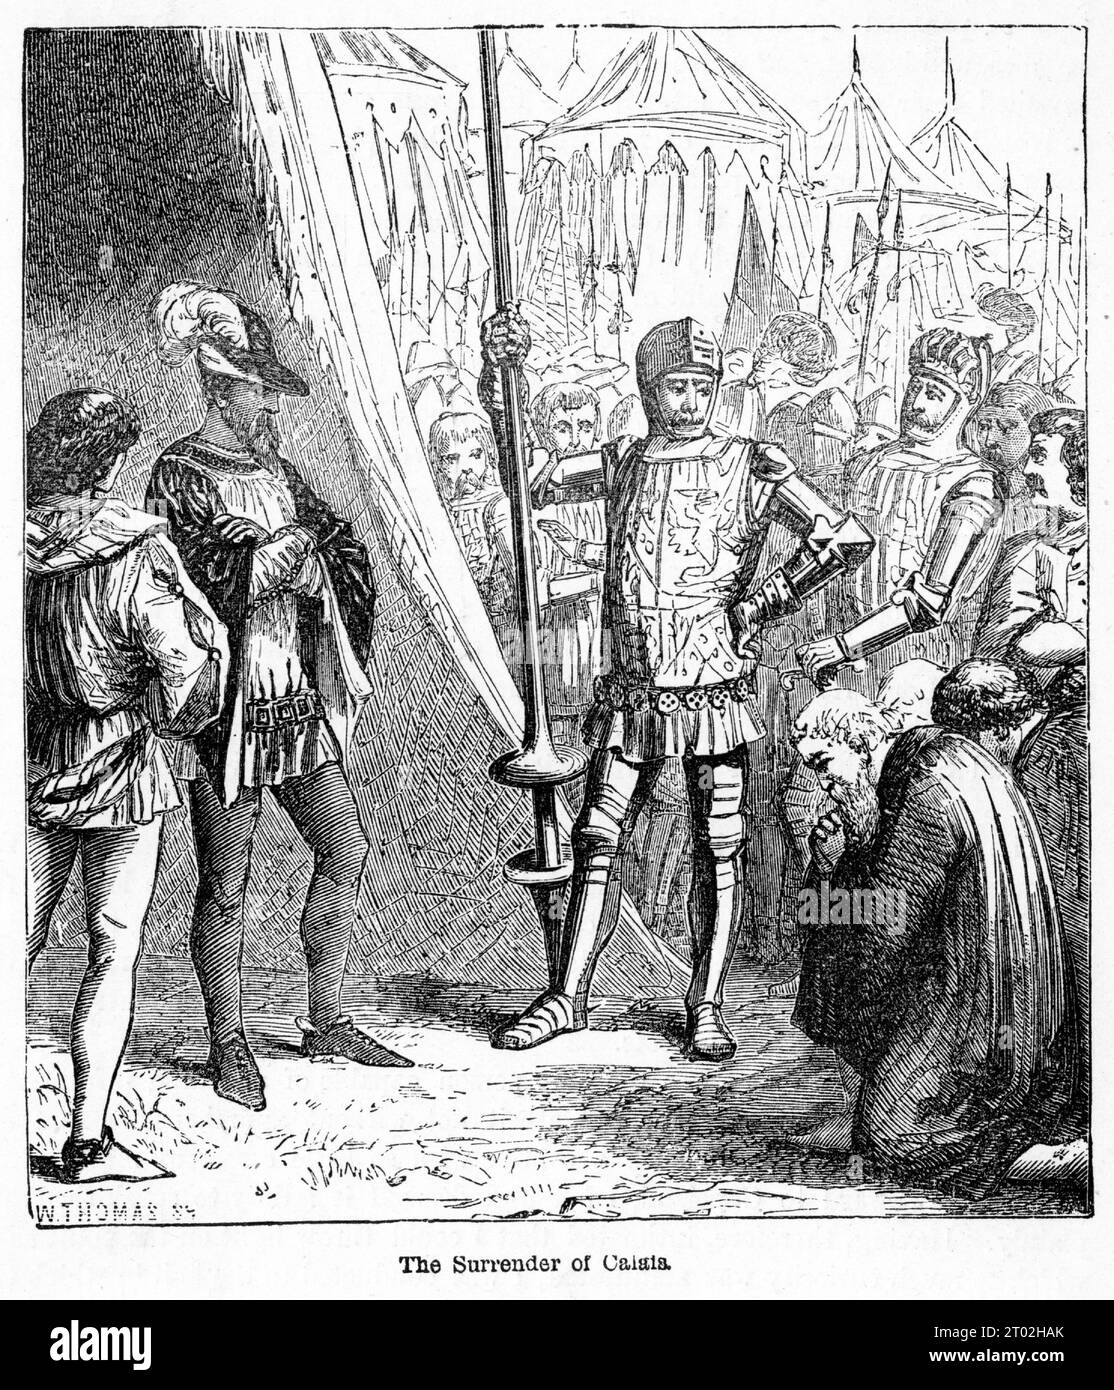 Engraving of a scene from the life of the Black Prince,  Edward of Woodstock, regarded as model of chivalry and one of the greatest knights of his age. Stock Photo